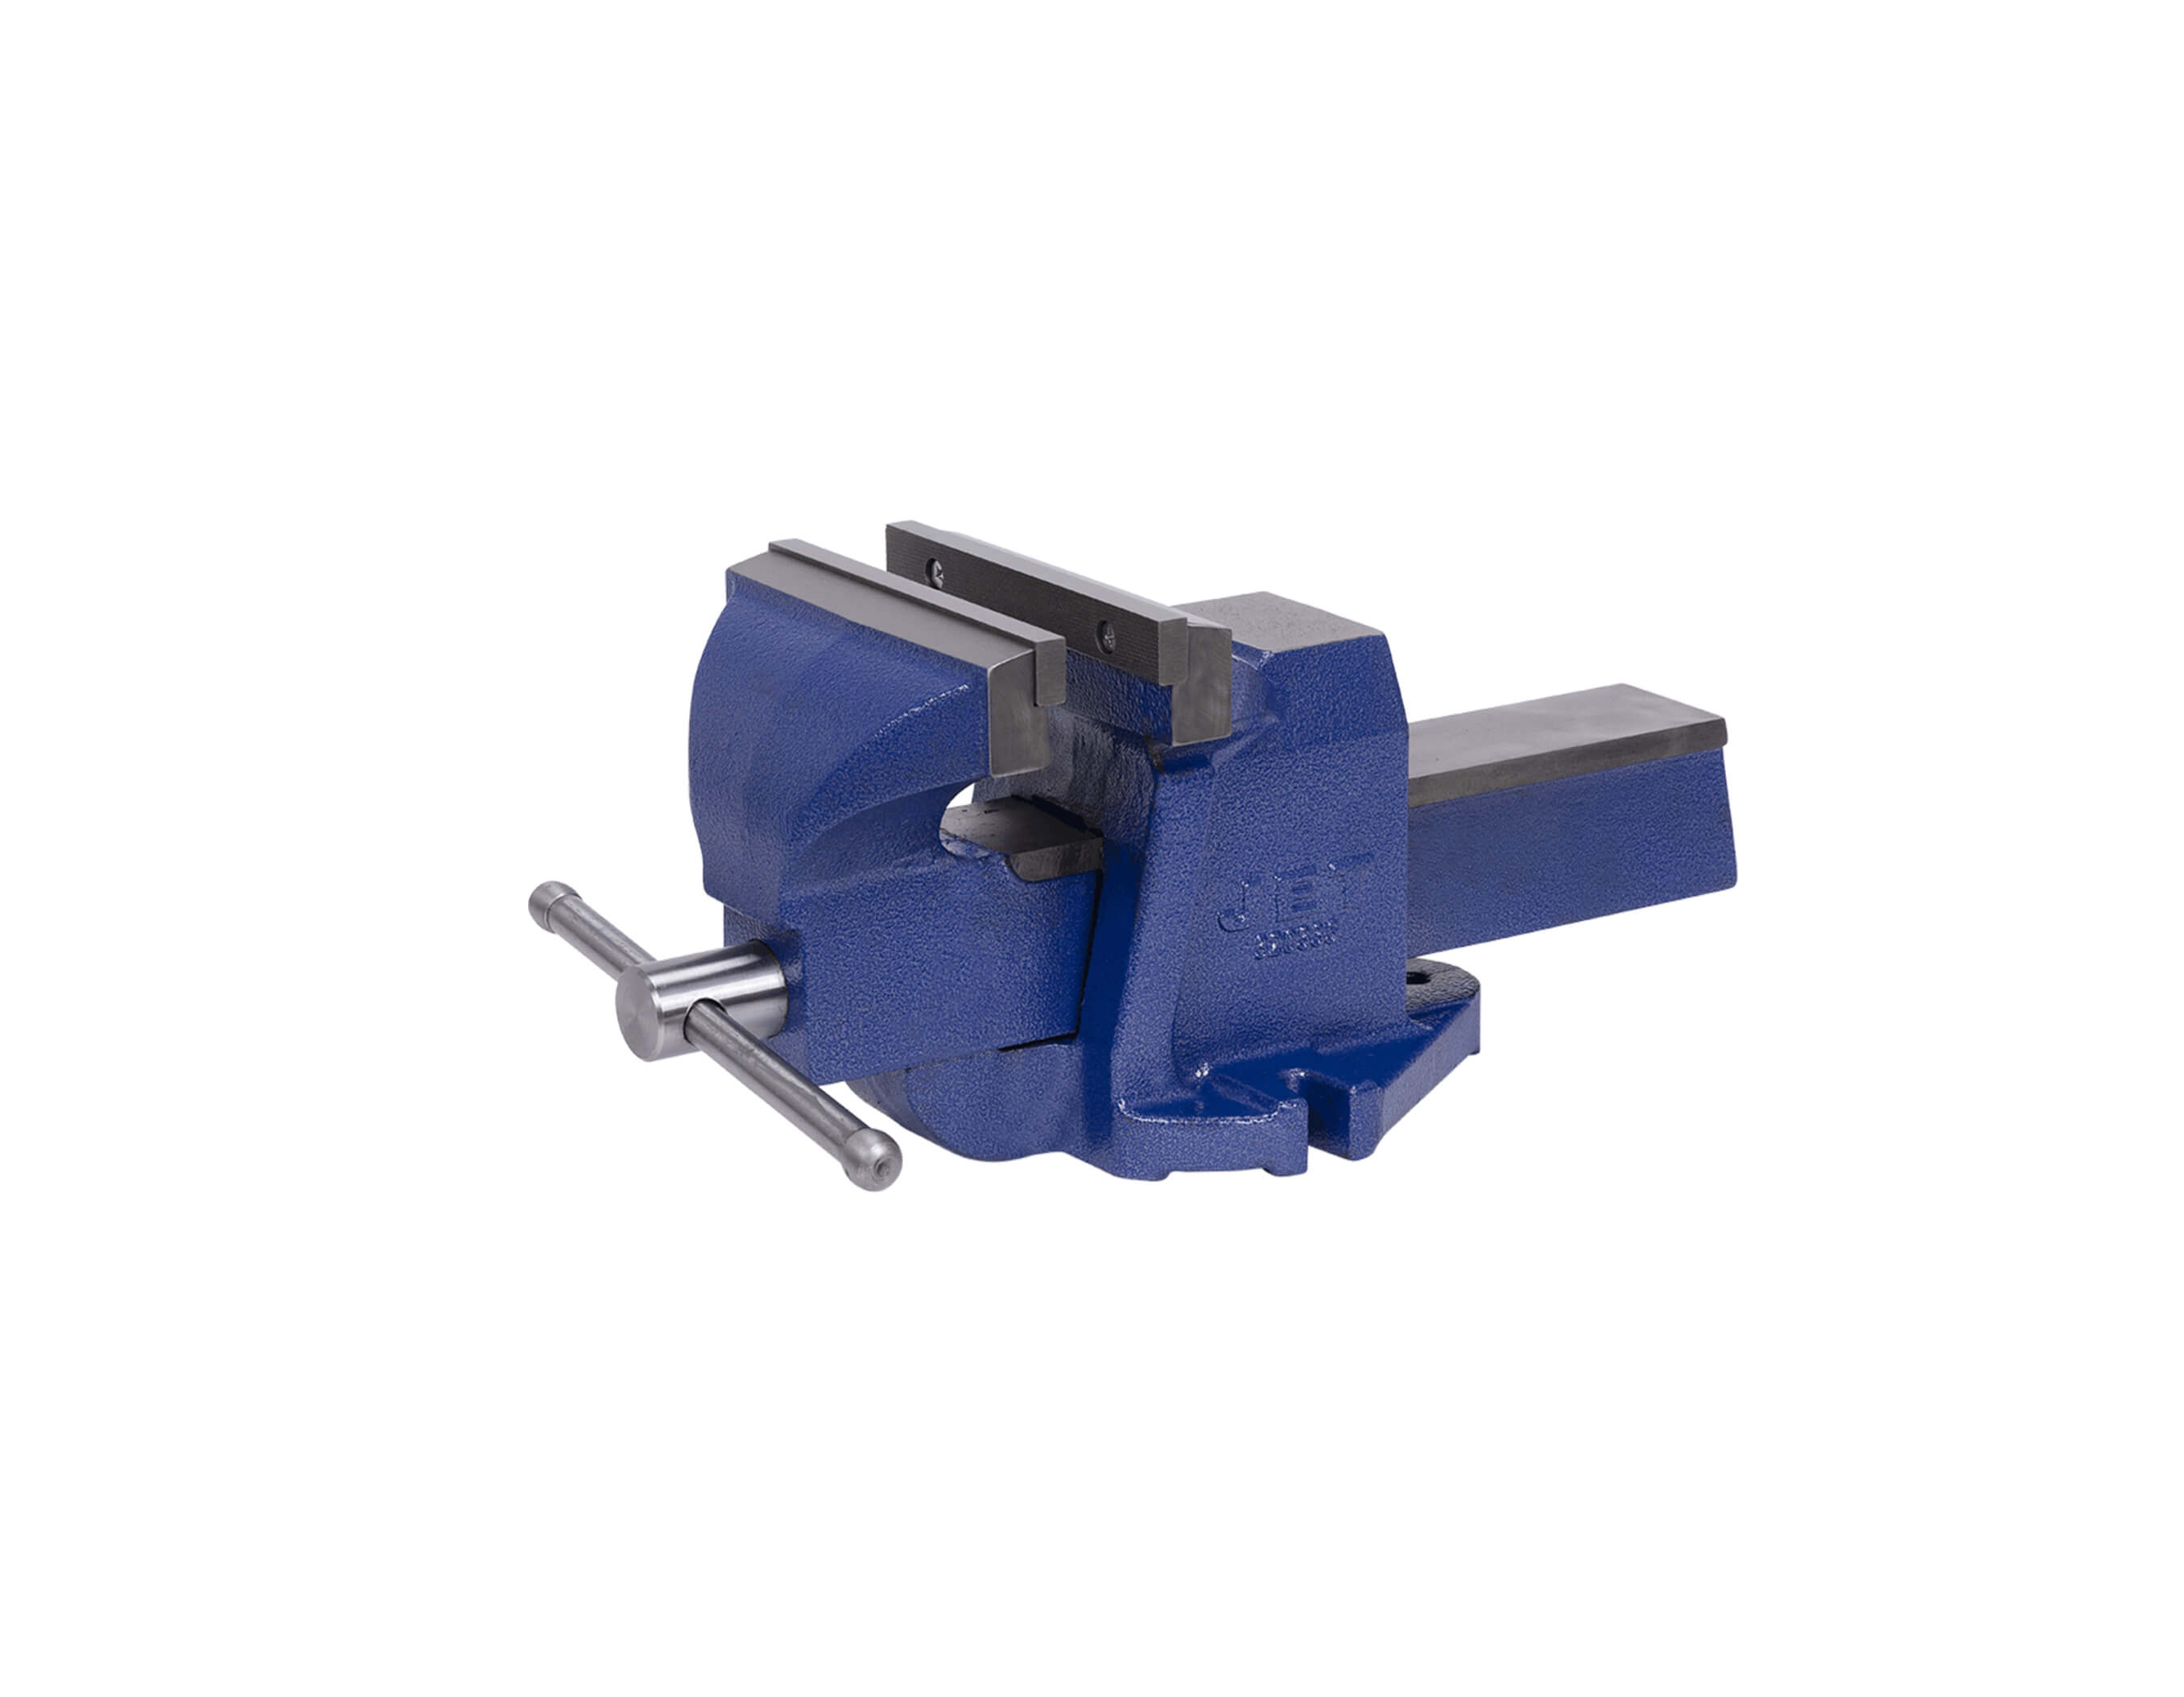 BENCH VISE - 8" JAW WIDTH